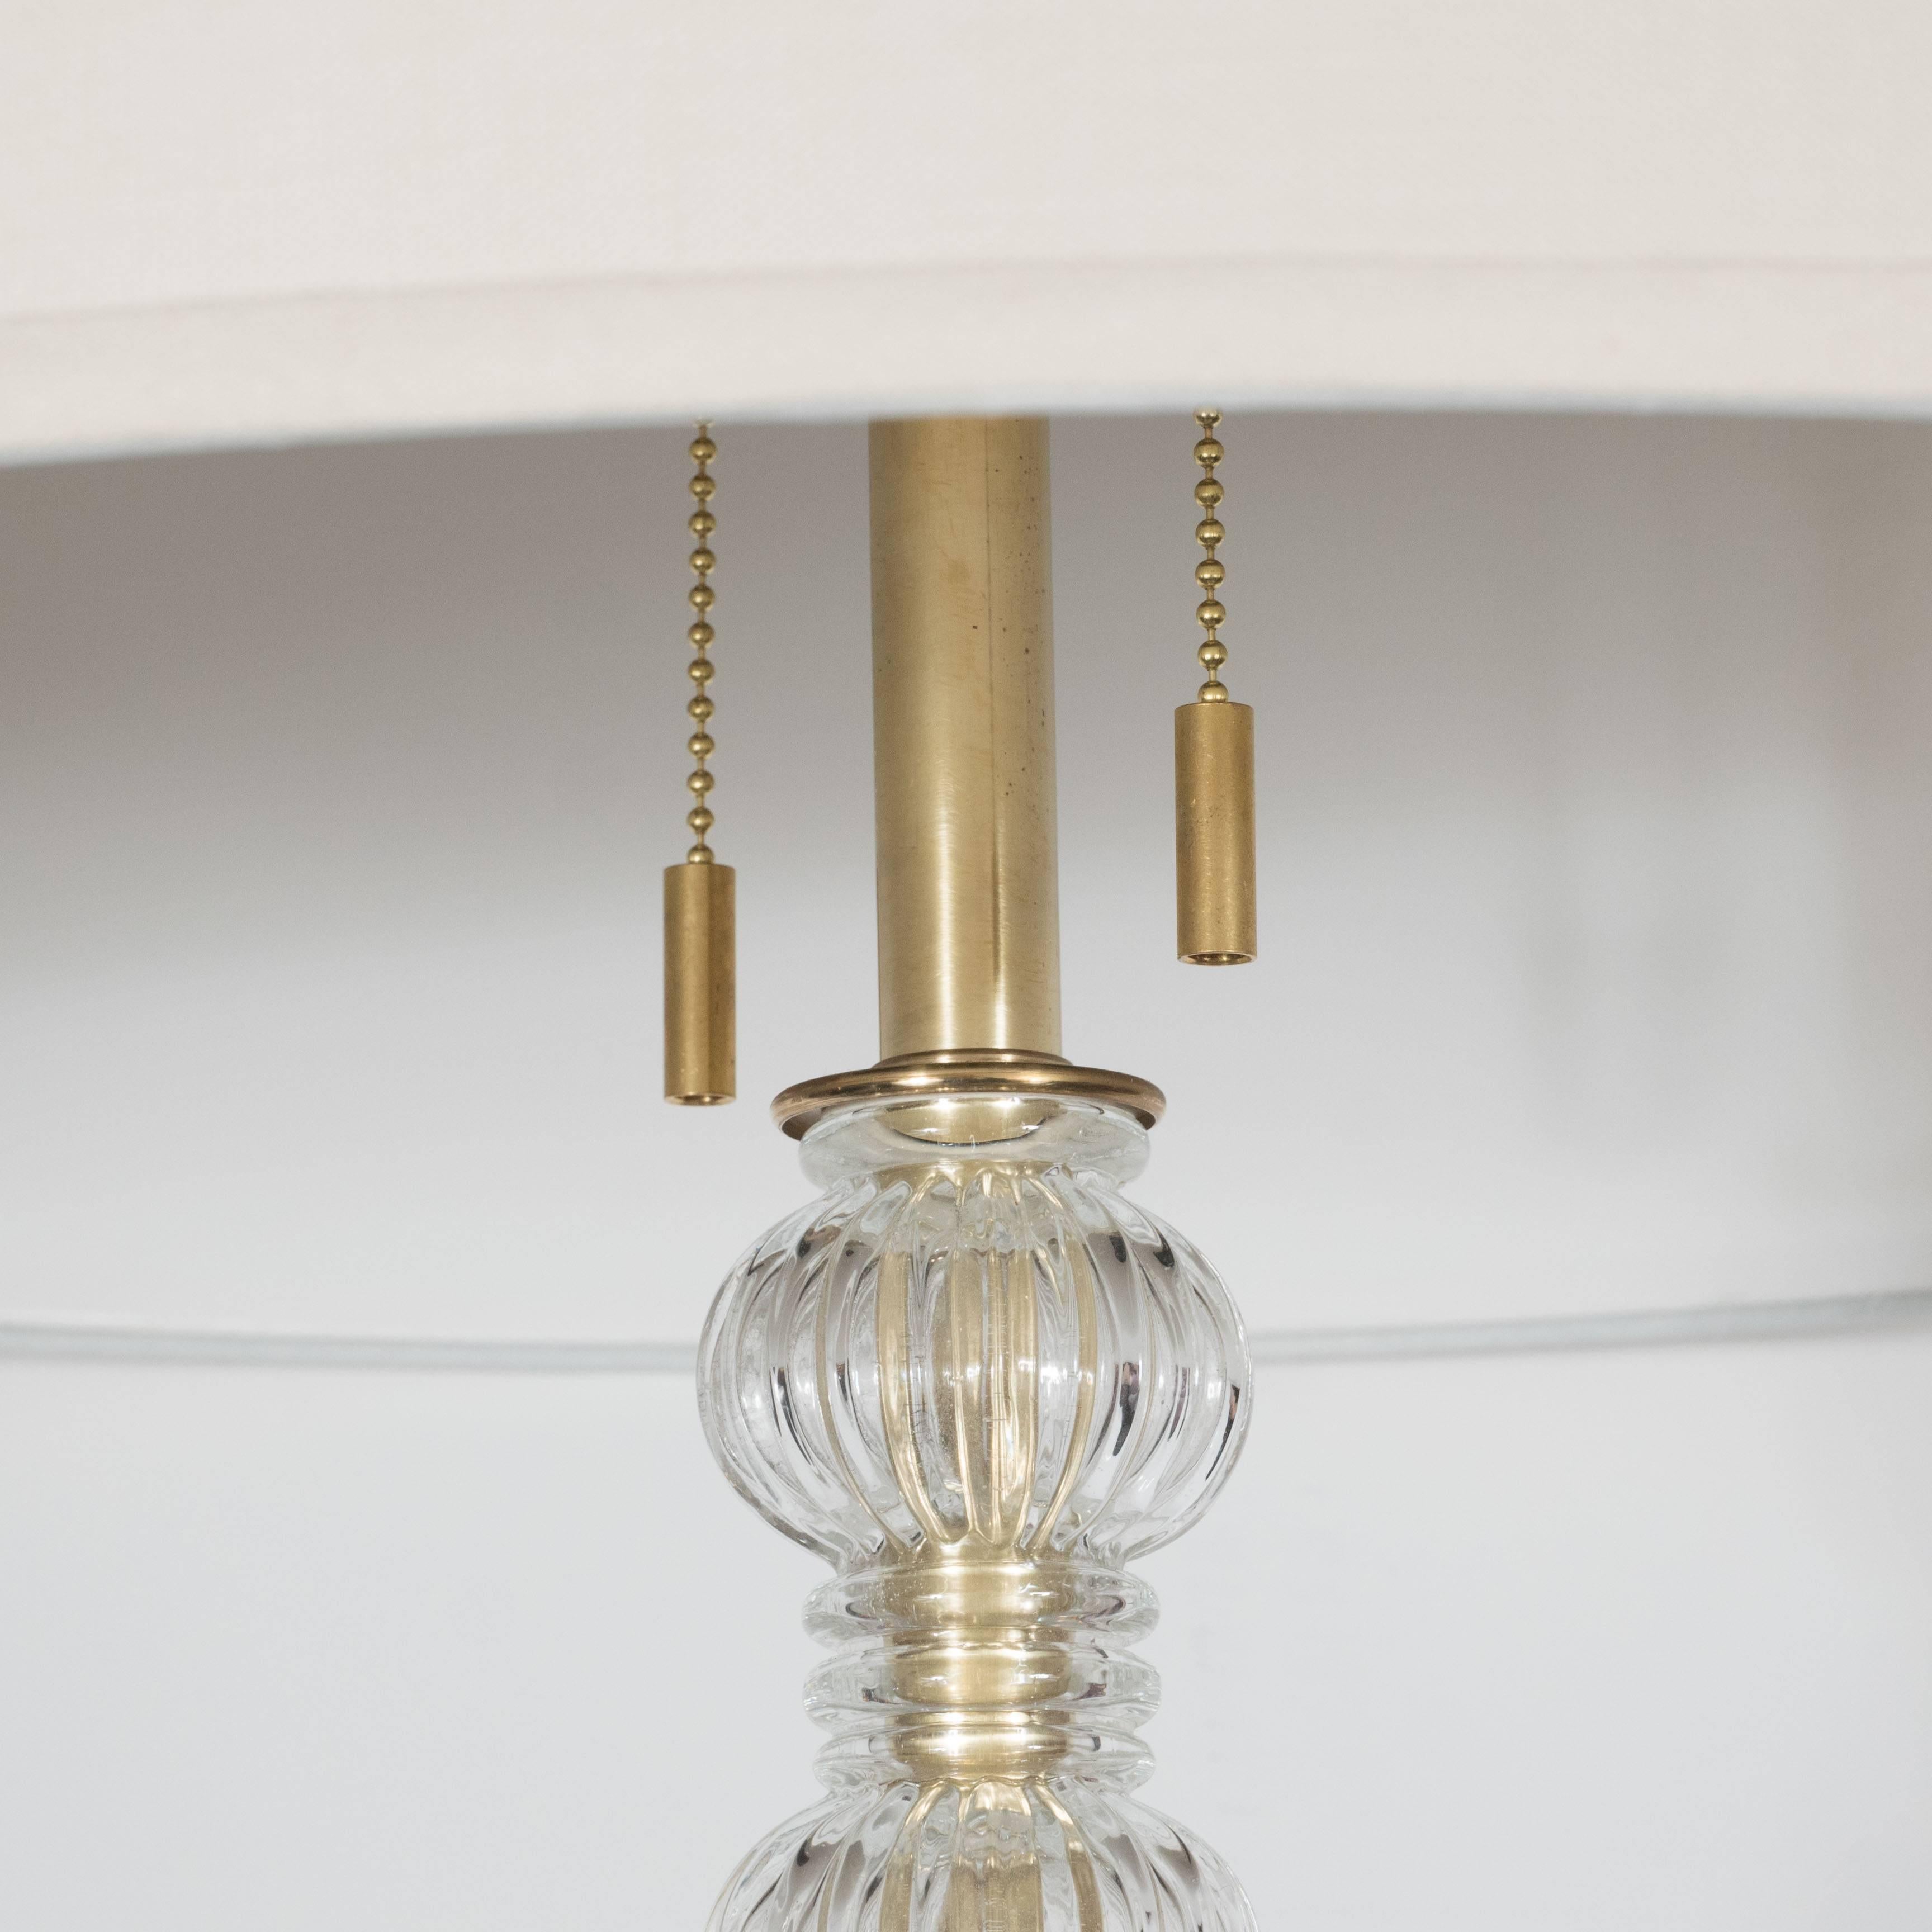 Mid-century Modernist floor lamp in Murano glass and brass, on a simple yet elegant circular base, the sleek brass stand beautifully interspersed with delicately molded Murano glass elements, two fittings with chains fitting two Edition bulbs,